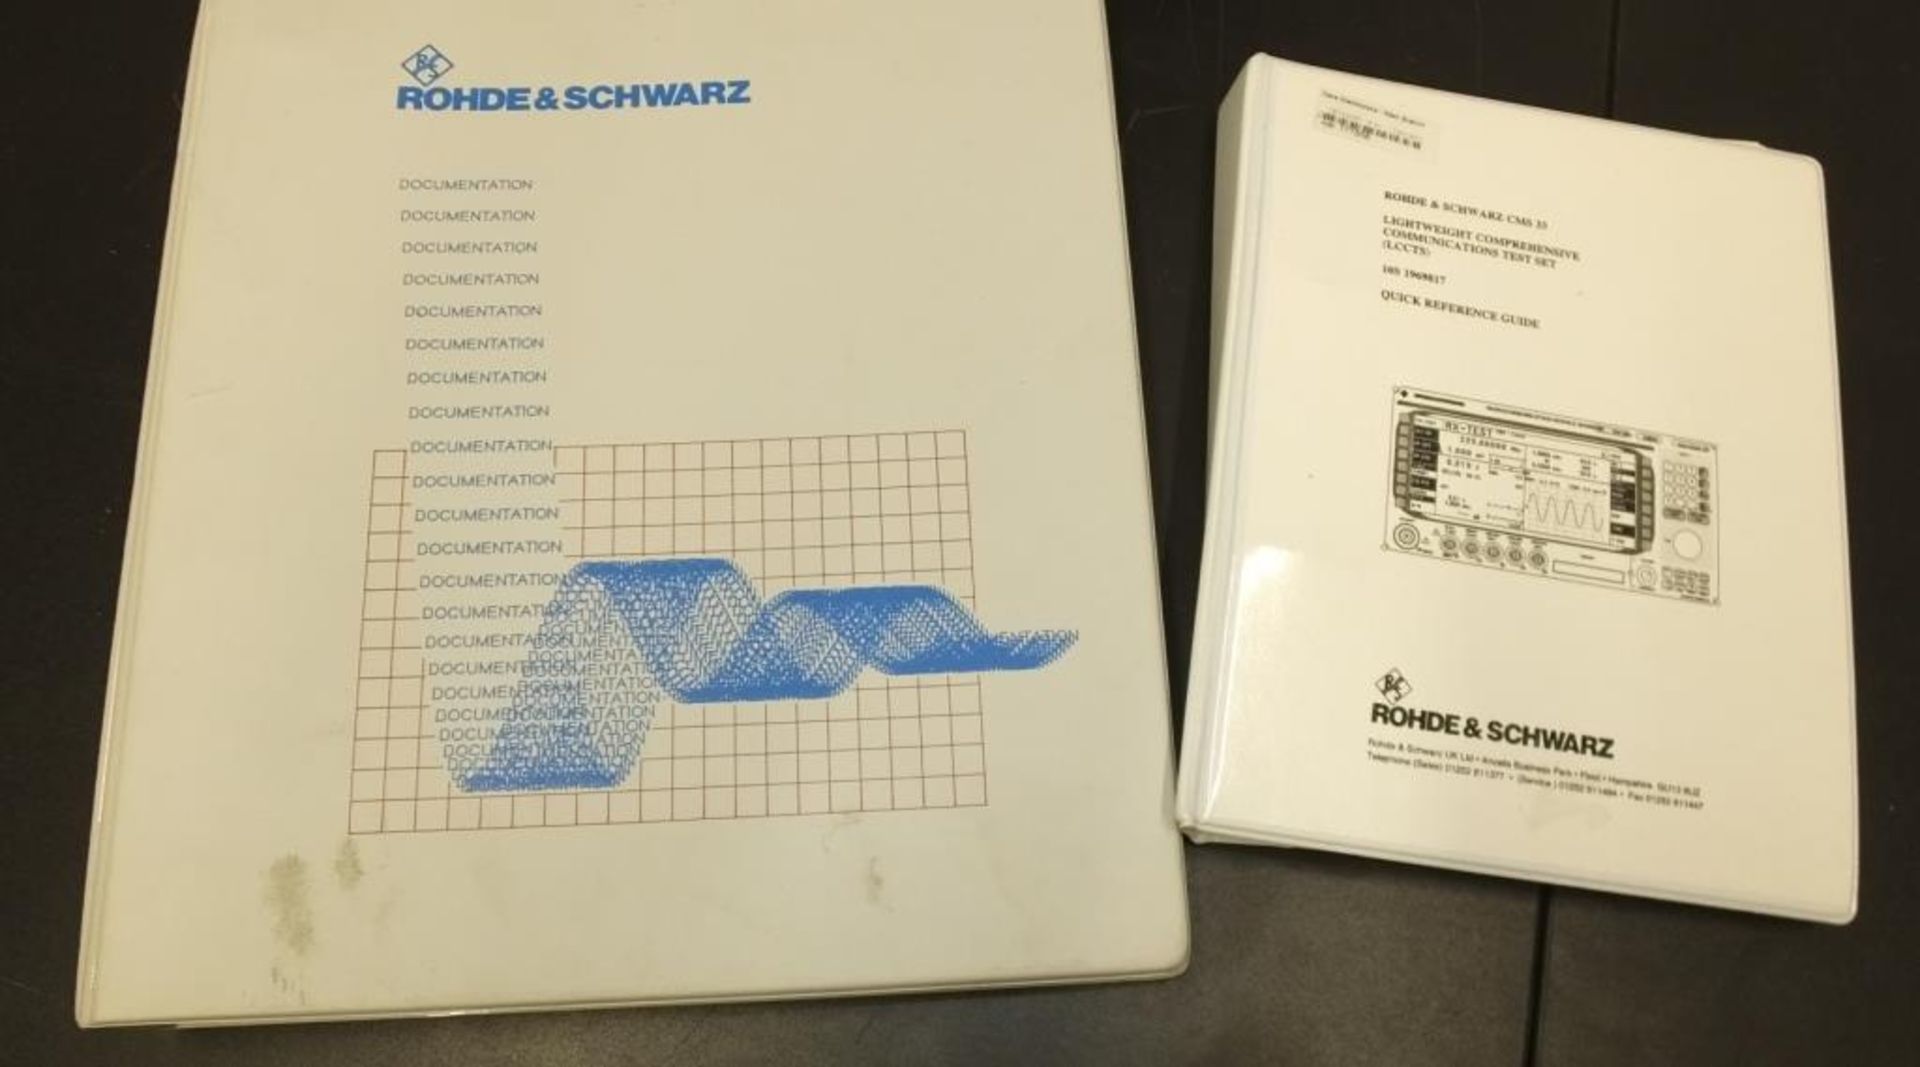 Rohde & Schwarz Radio Communications monitor 0.4 - 1000mhz - CMS33 - 840.0009.34, antenna base in co - Image 15 of 18